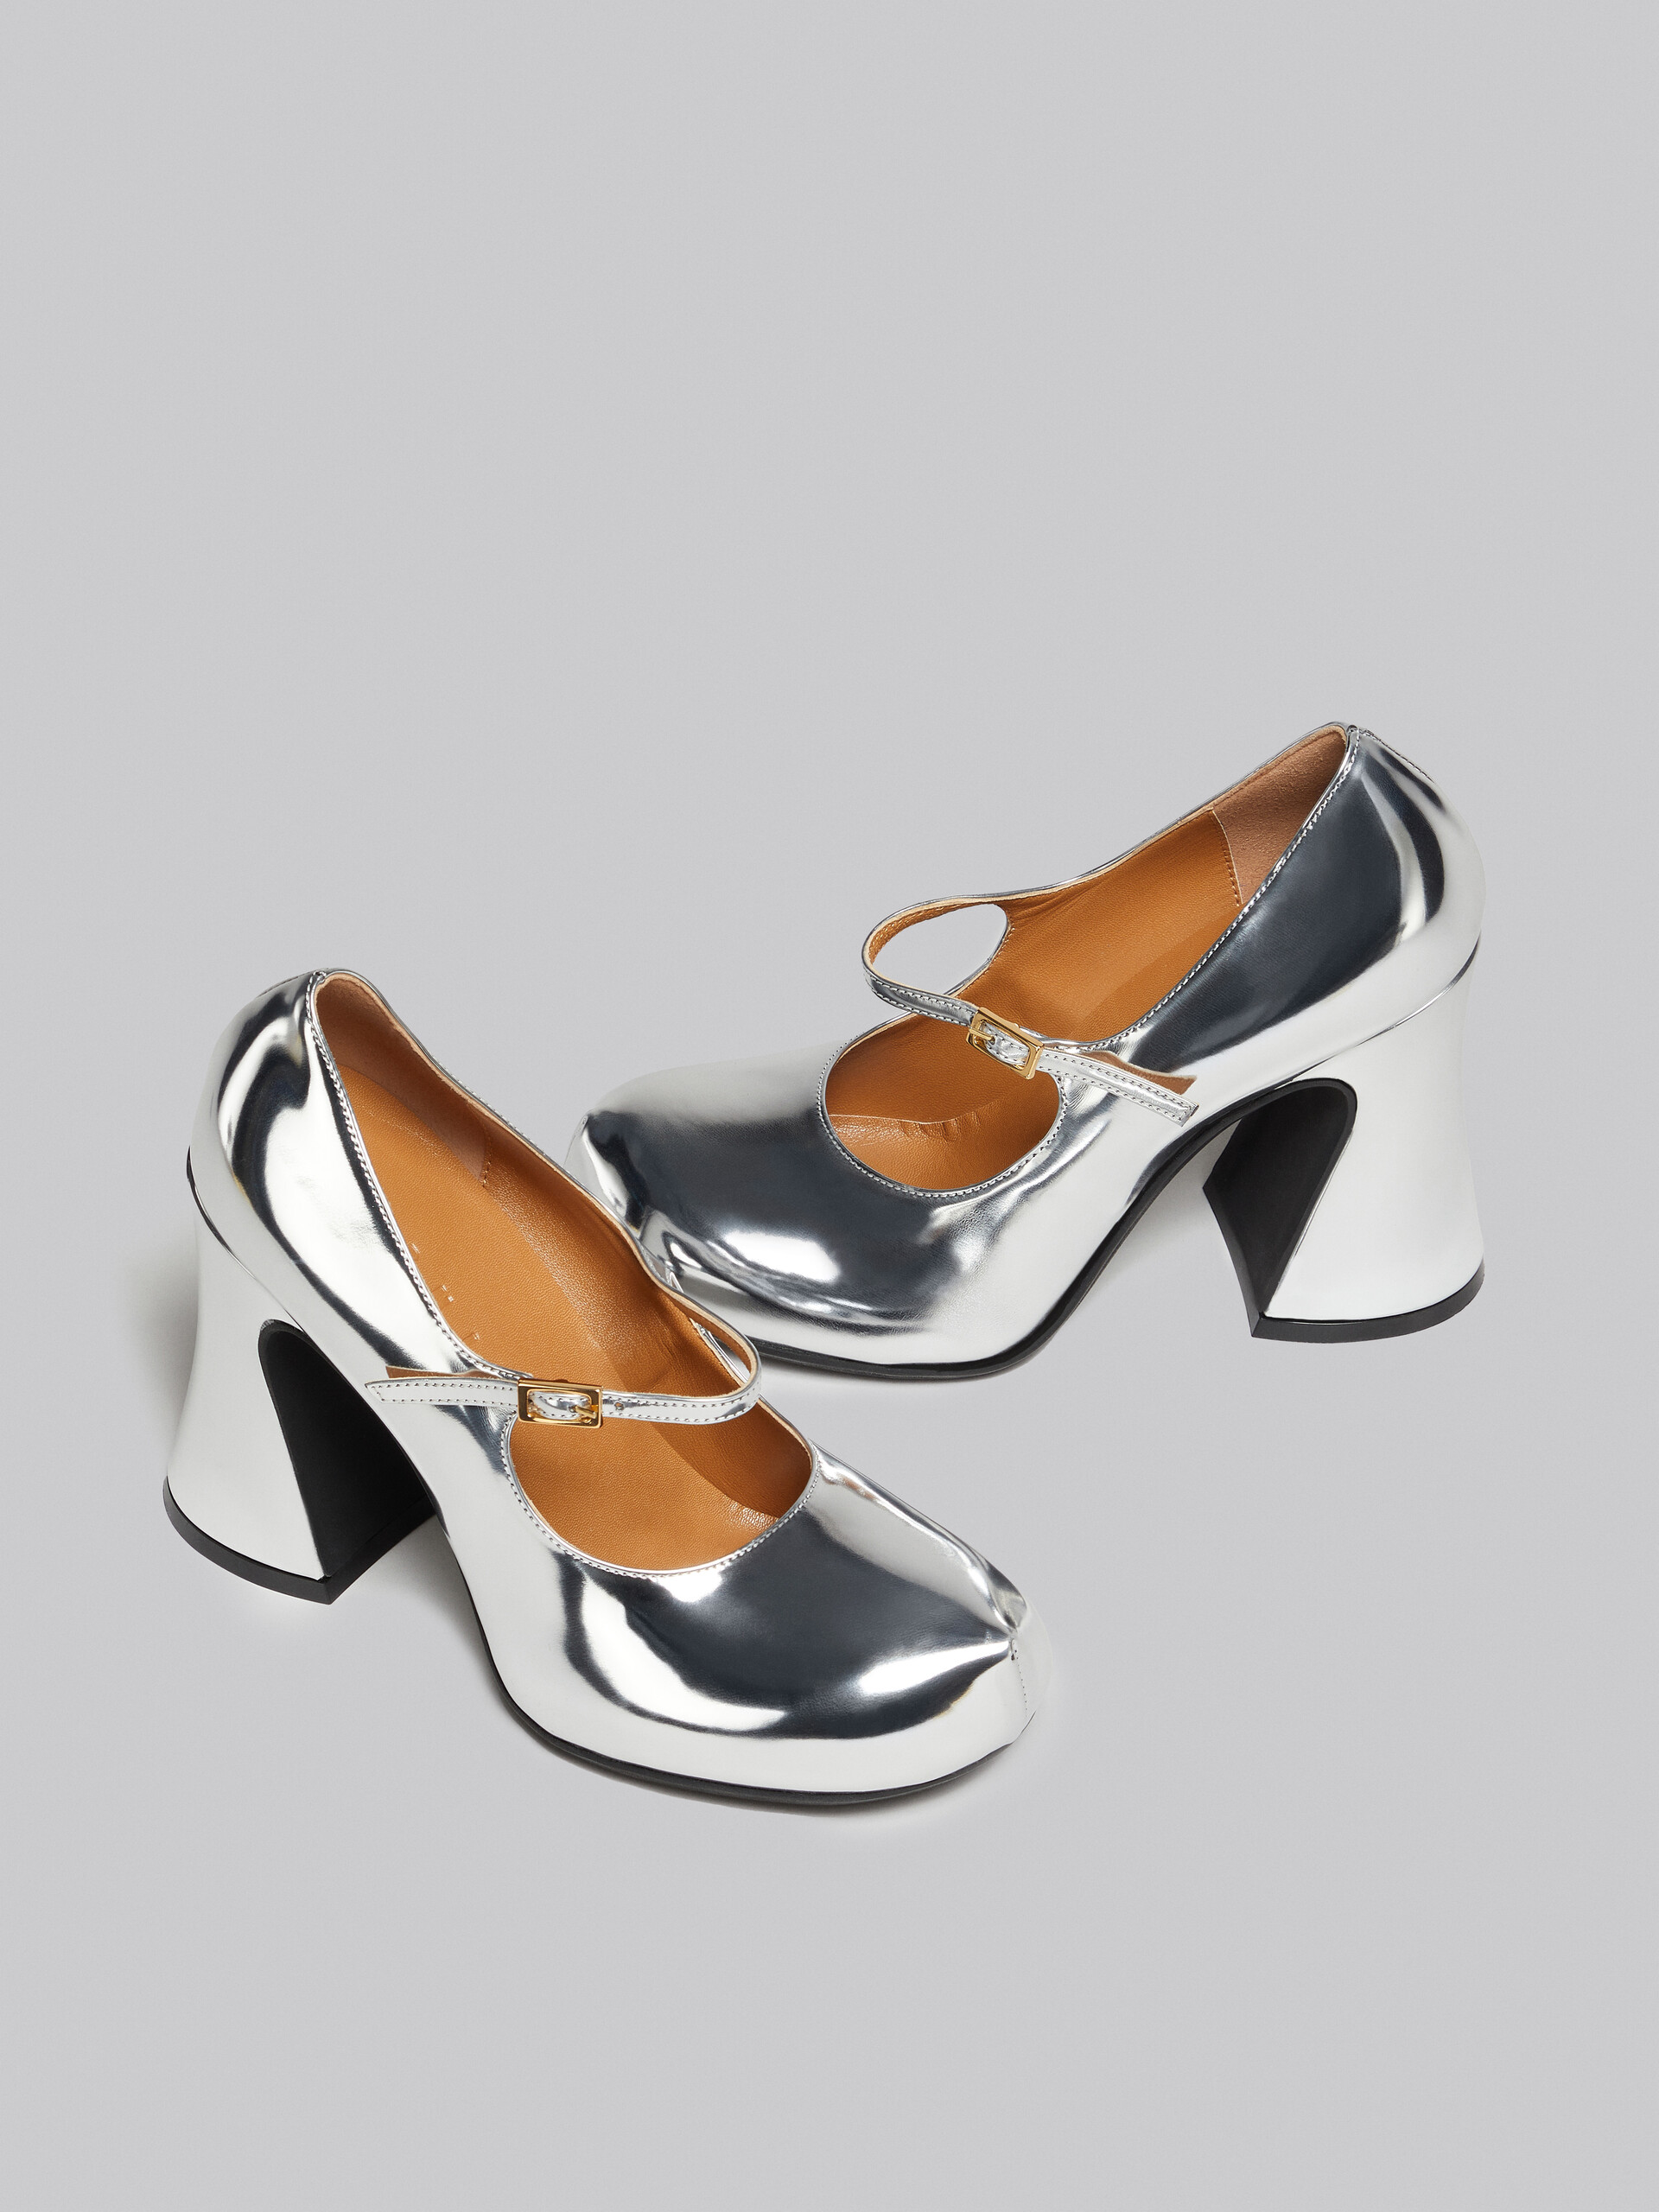 Silver mirrored leather Mary Janes - Sneakers - Image 5